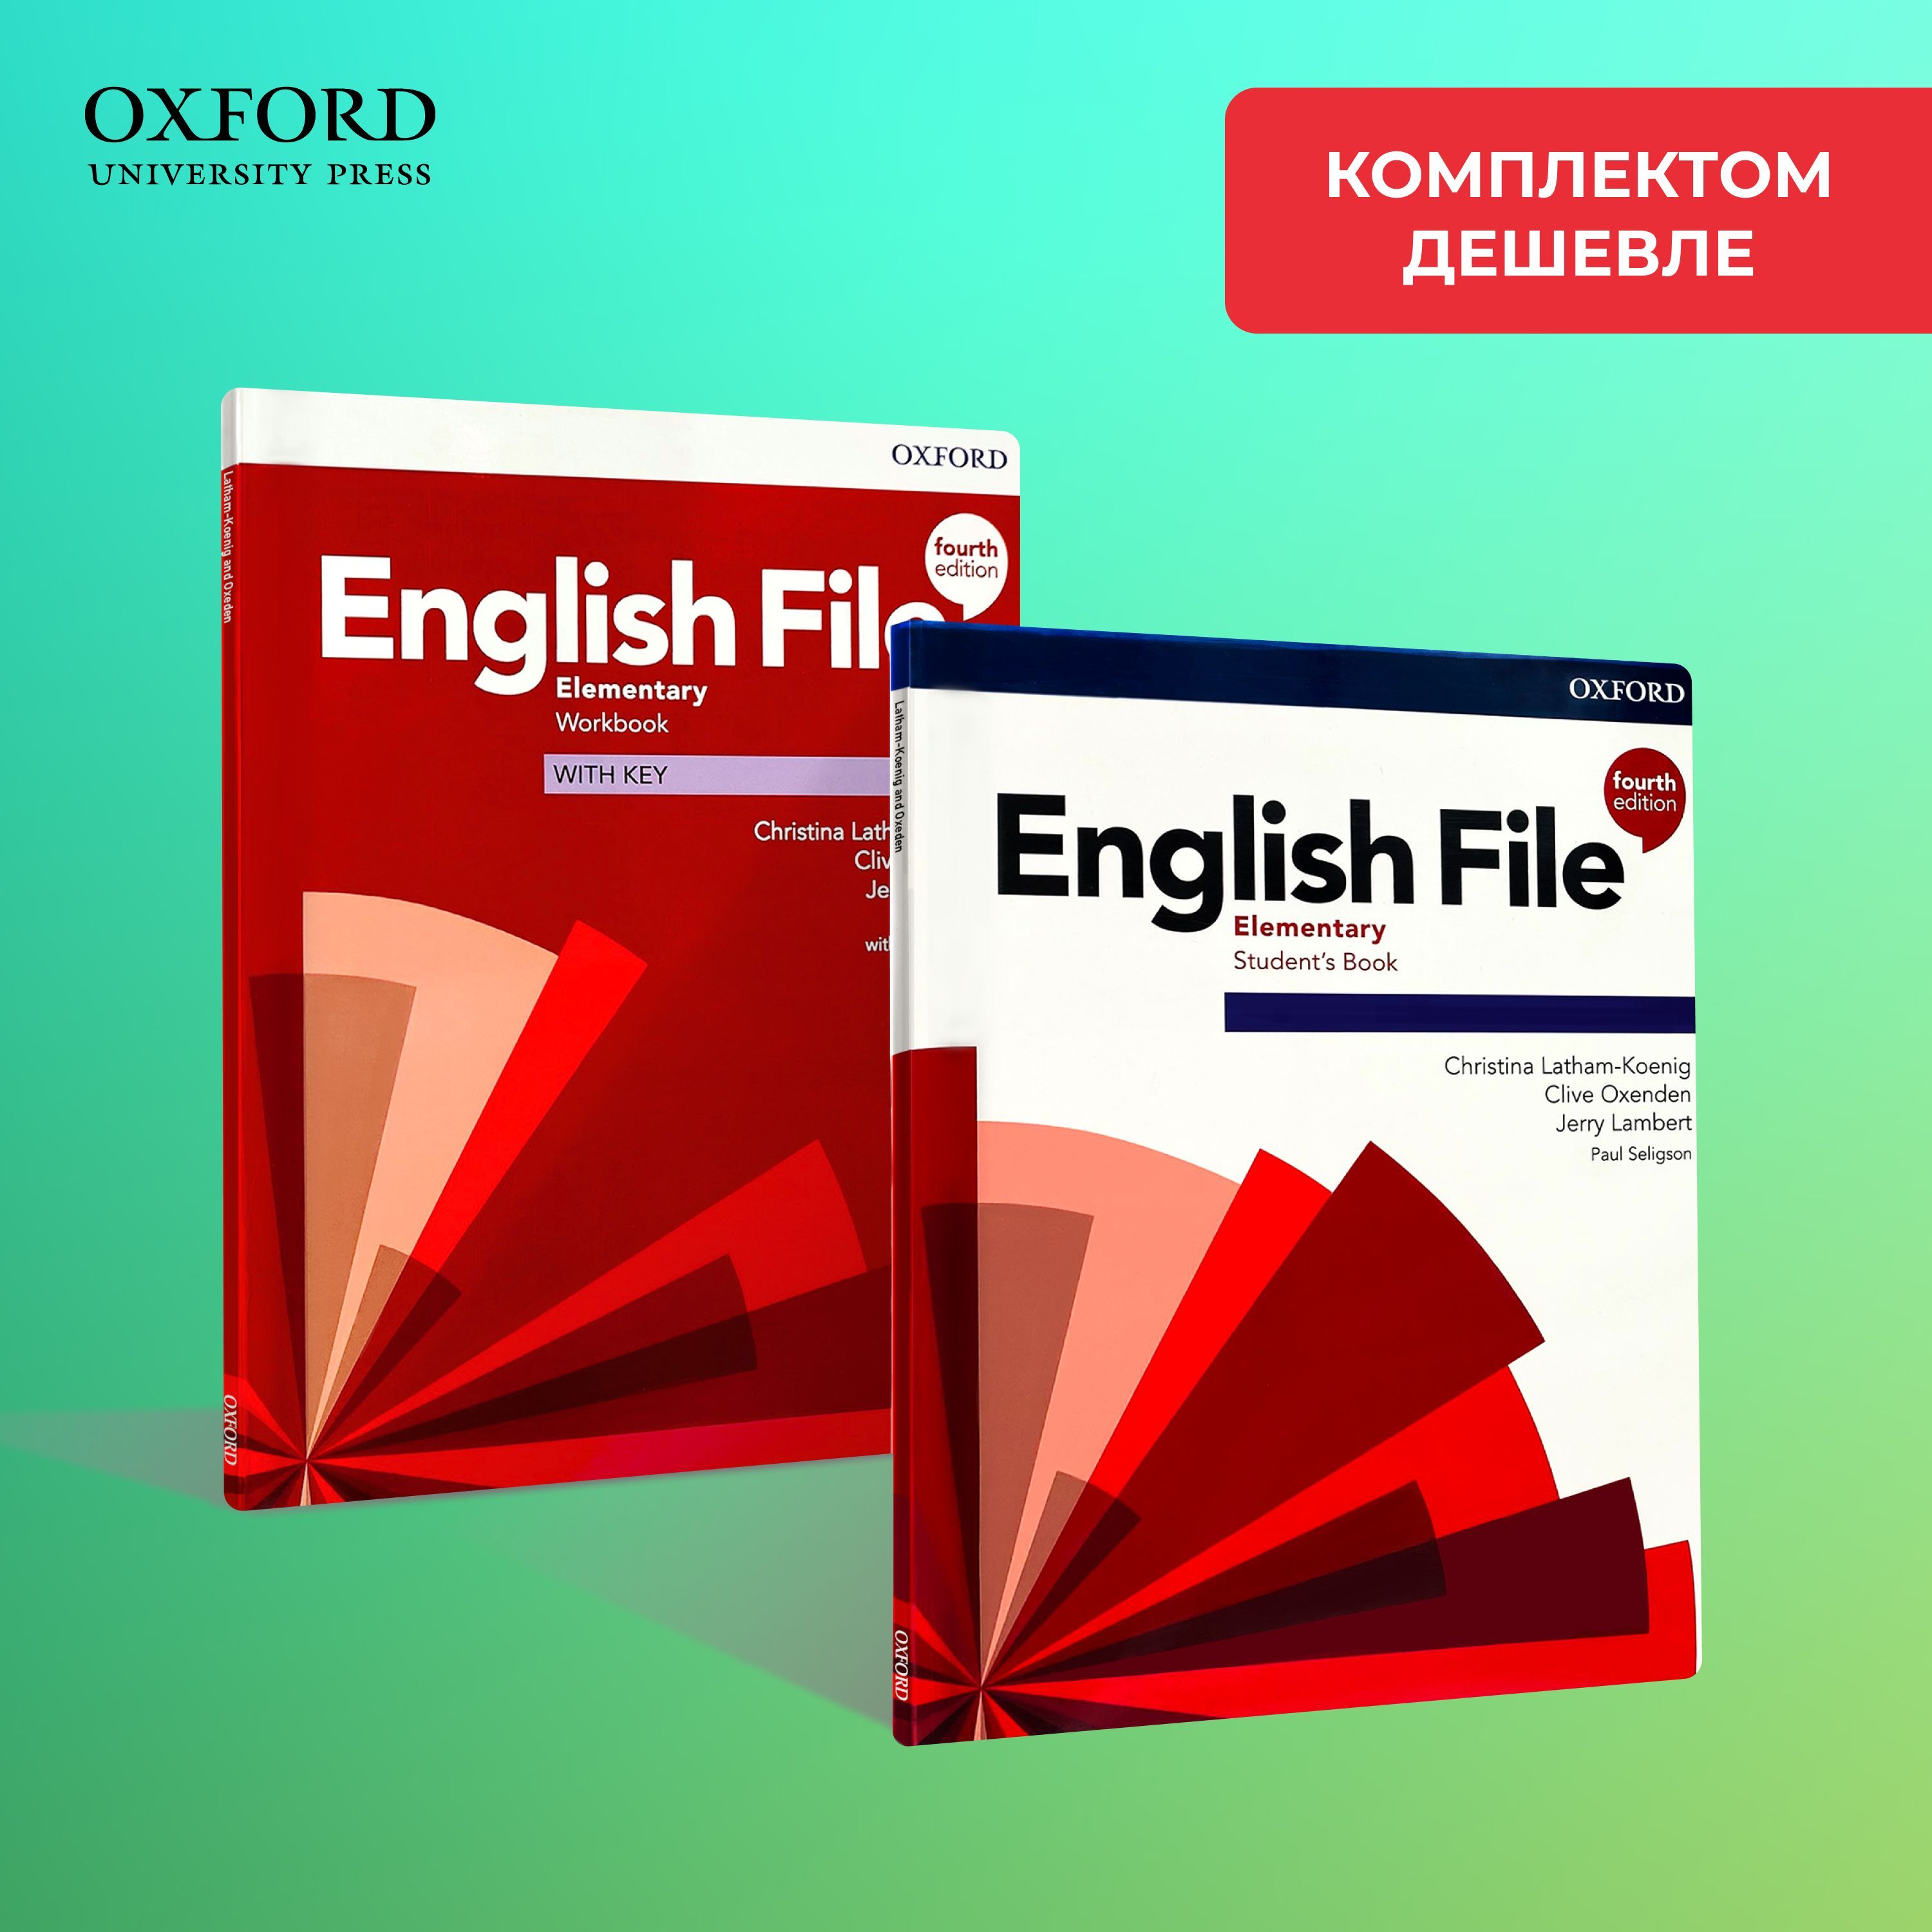 English file elementary 4. English file 4 Edition Elementary. English file Elementary 4th Edition. English file Elementary 4th Edition 7b. English file fourth Edition back Cover.